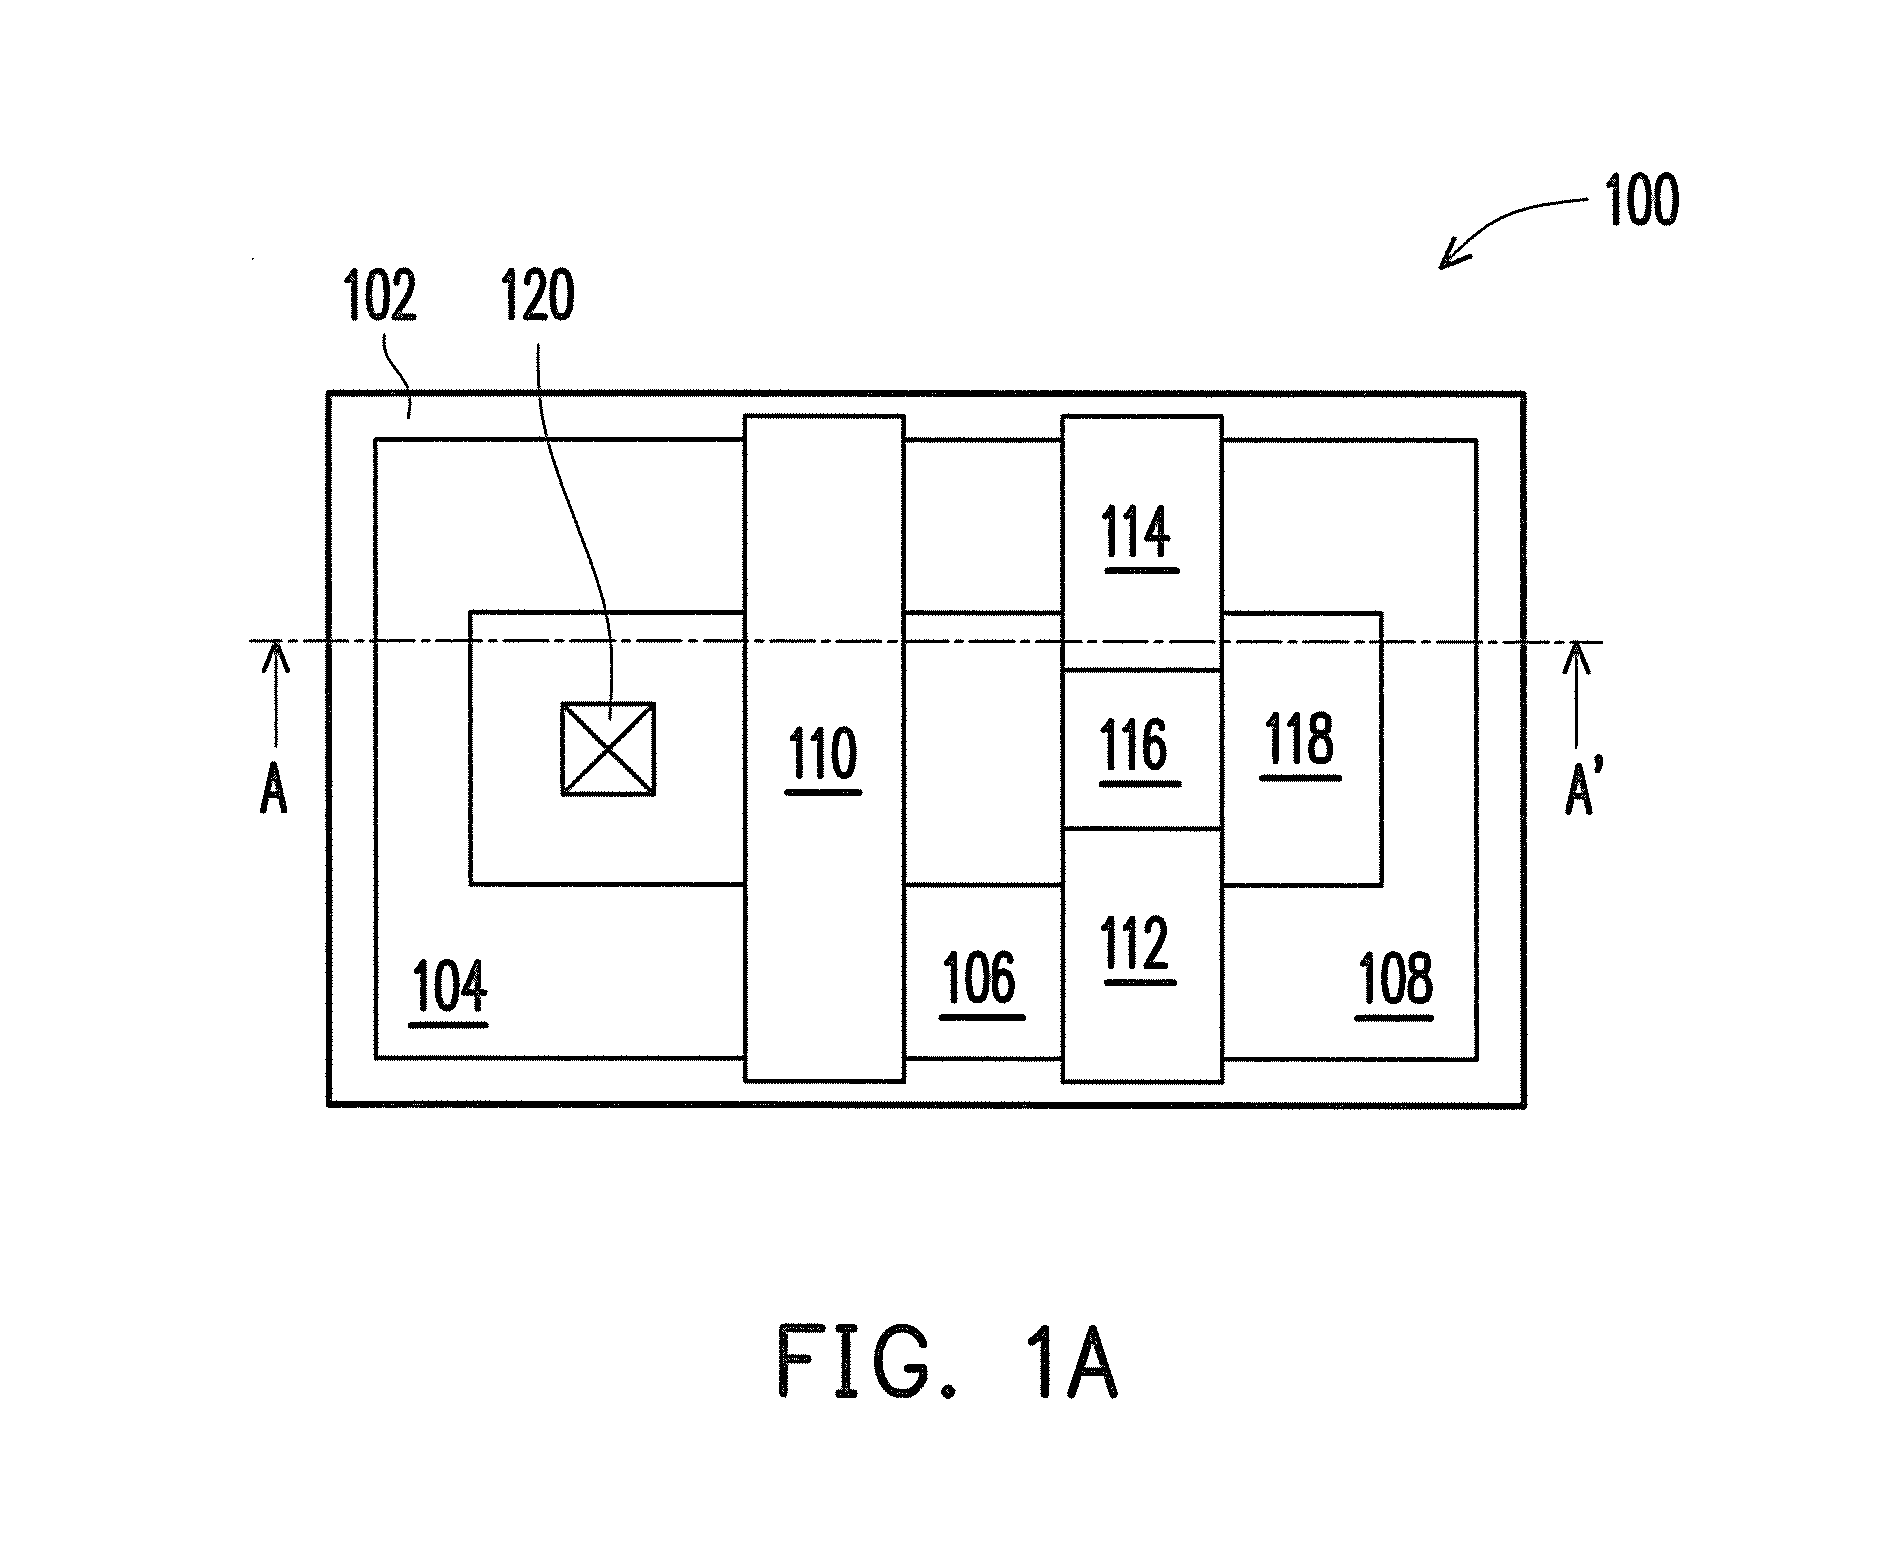 Antifuse otp memory cell with performance improvement prevention and operating method of memory